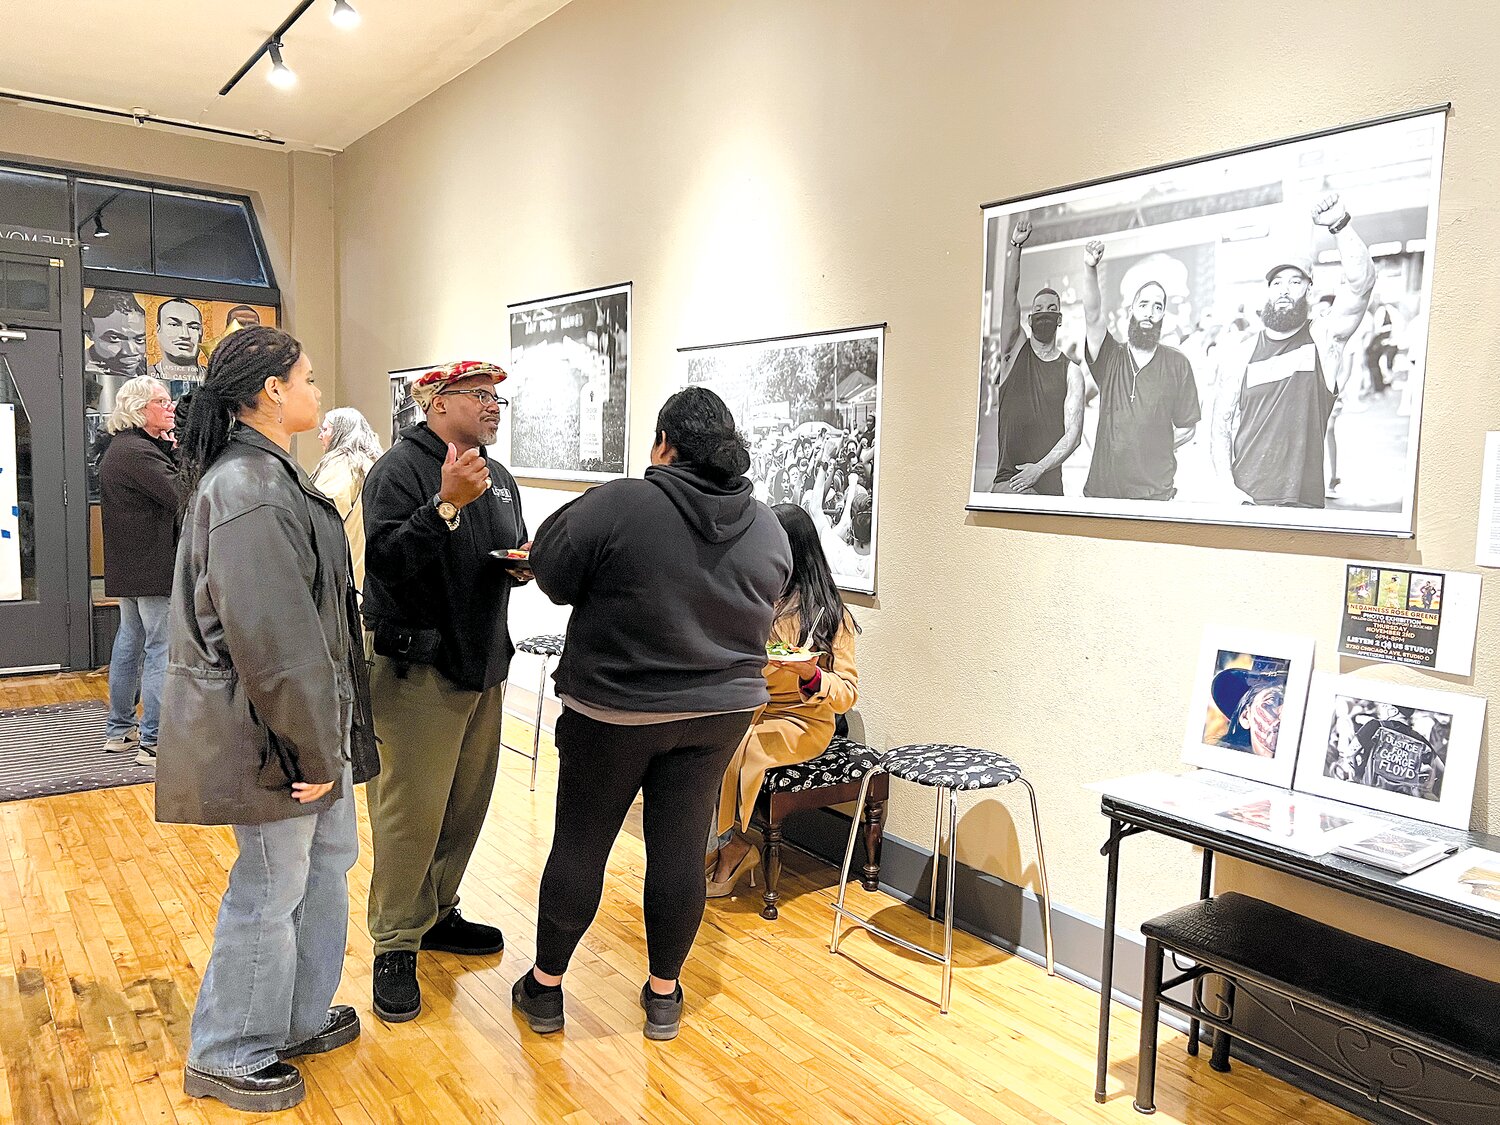 Nedahness Rose Greene (right) speaks with KingDemetrius Pendleton (second from left)at Listen 2 Us Studio at 38th and Chicago. “To have my work that I’ve done here, it’s powerful. Because it happened here, and to be showcasing it right here, it means a lot,” Greene said.